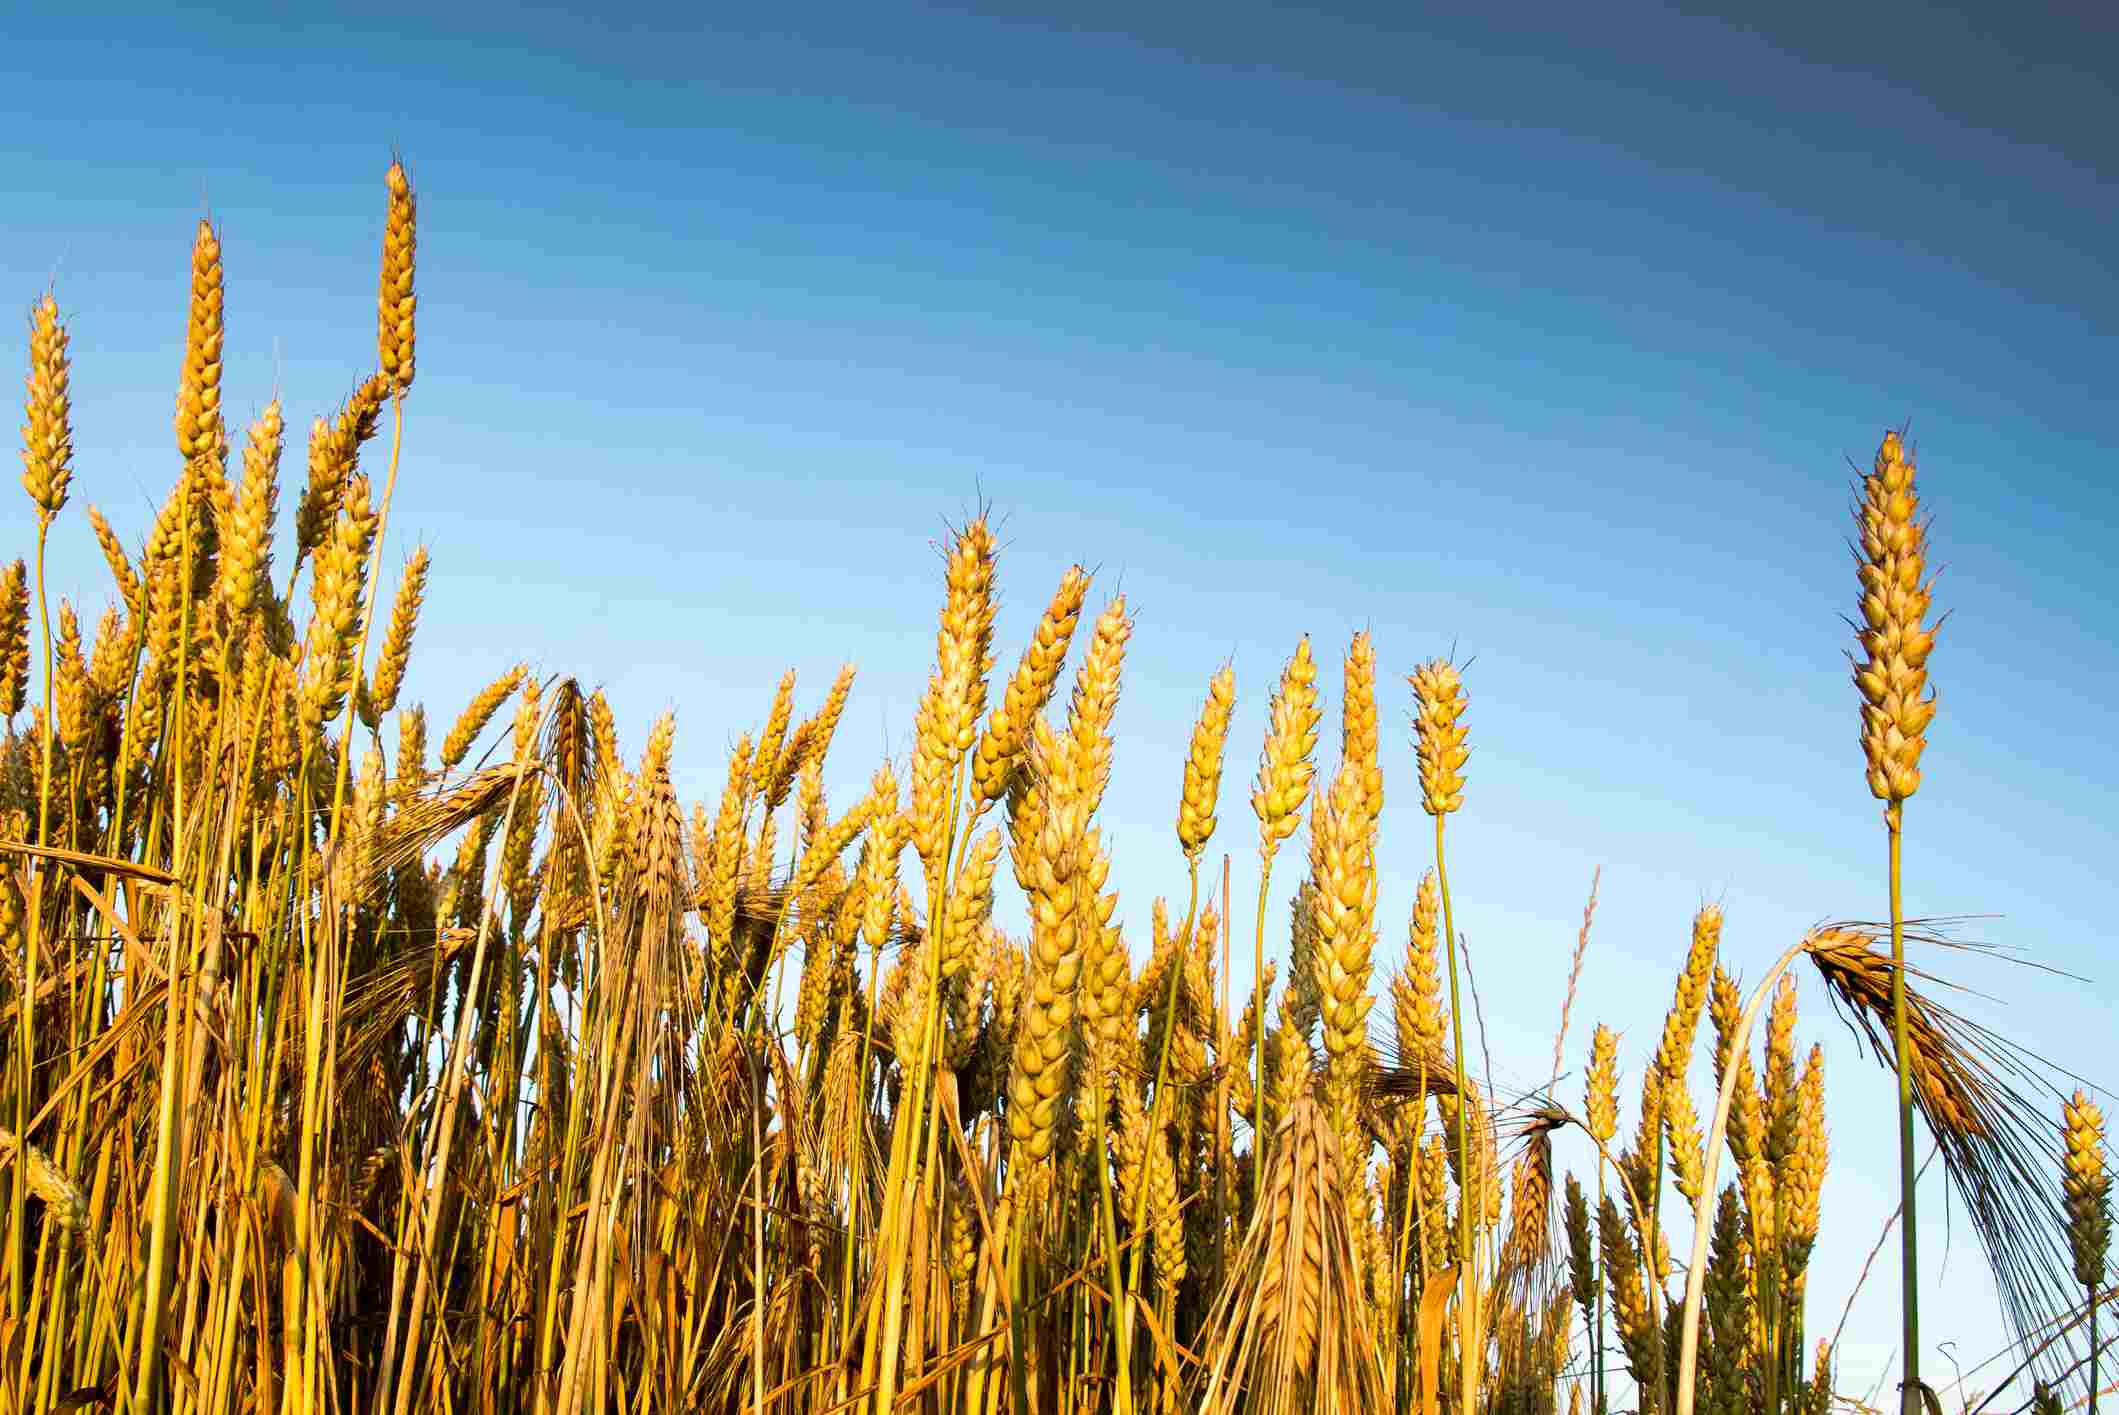 Field of wheat against a blue sky.